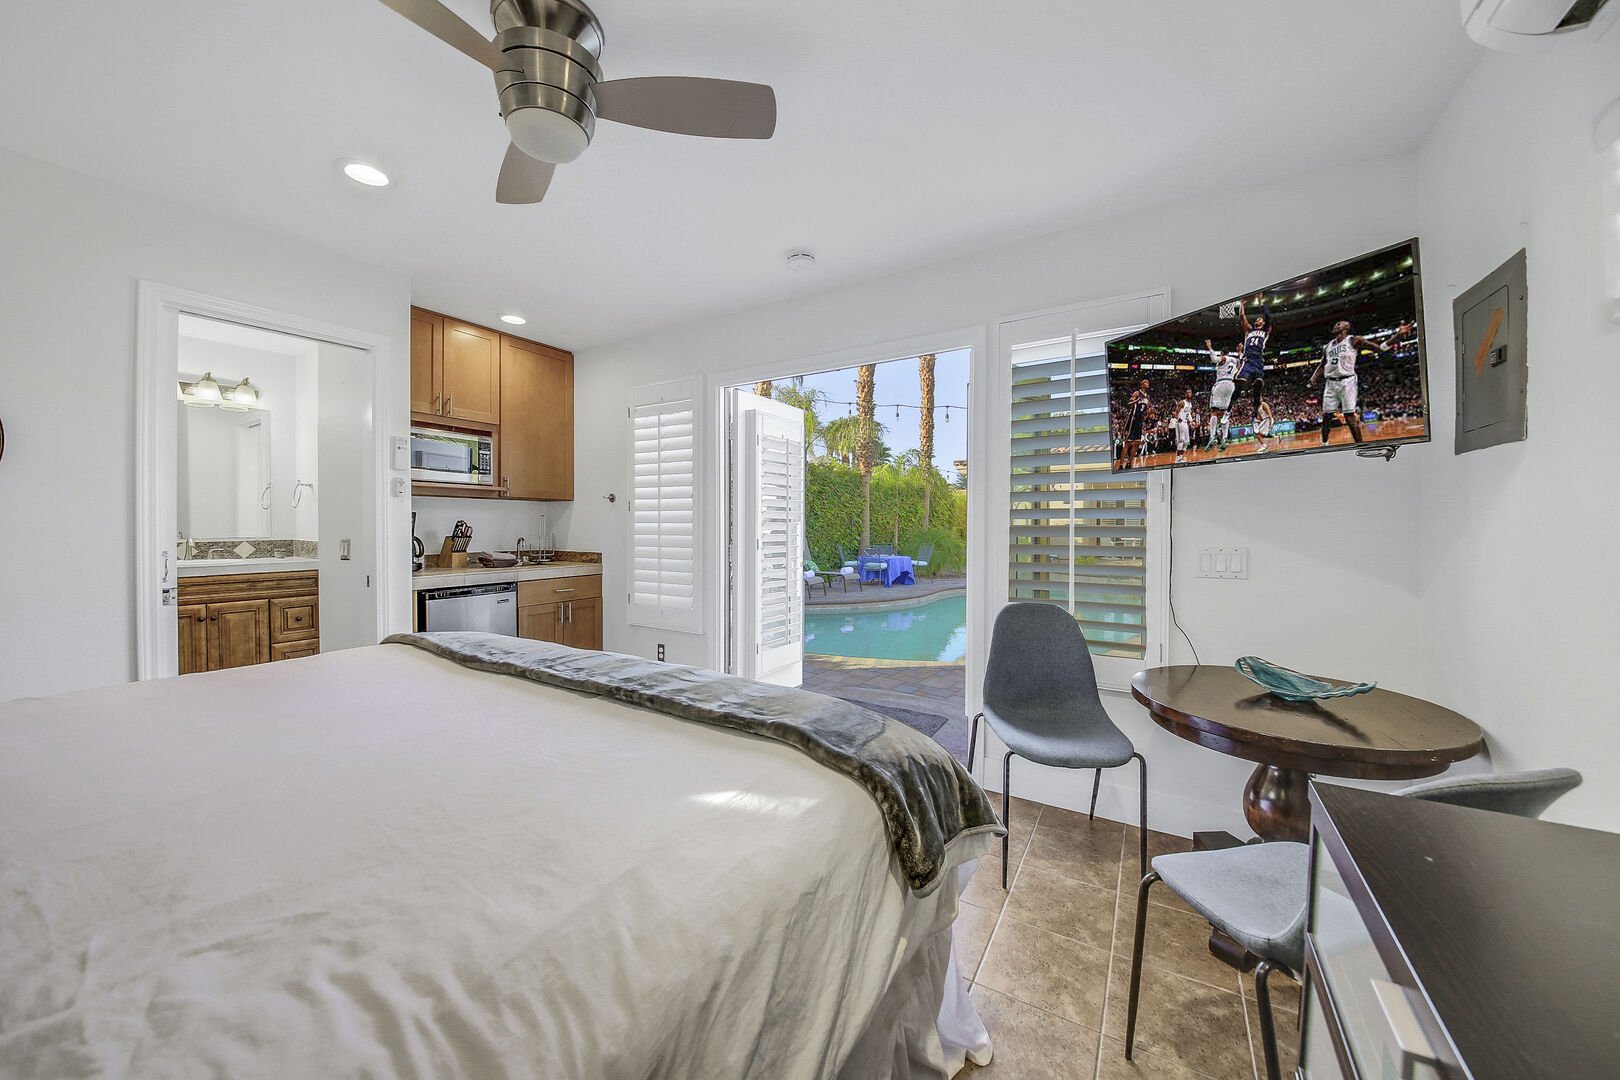 Casita Suite 2 features a 35-inch television and a kitchenette with a microwave, sink and coffee maker.